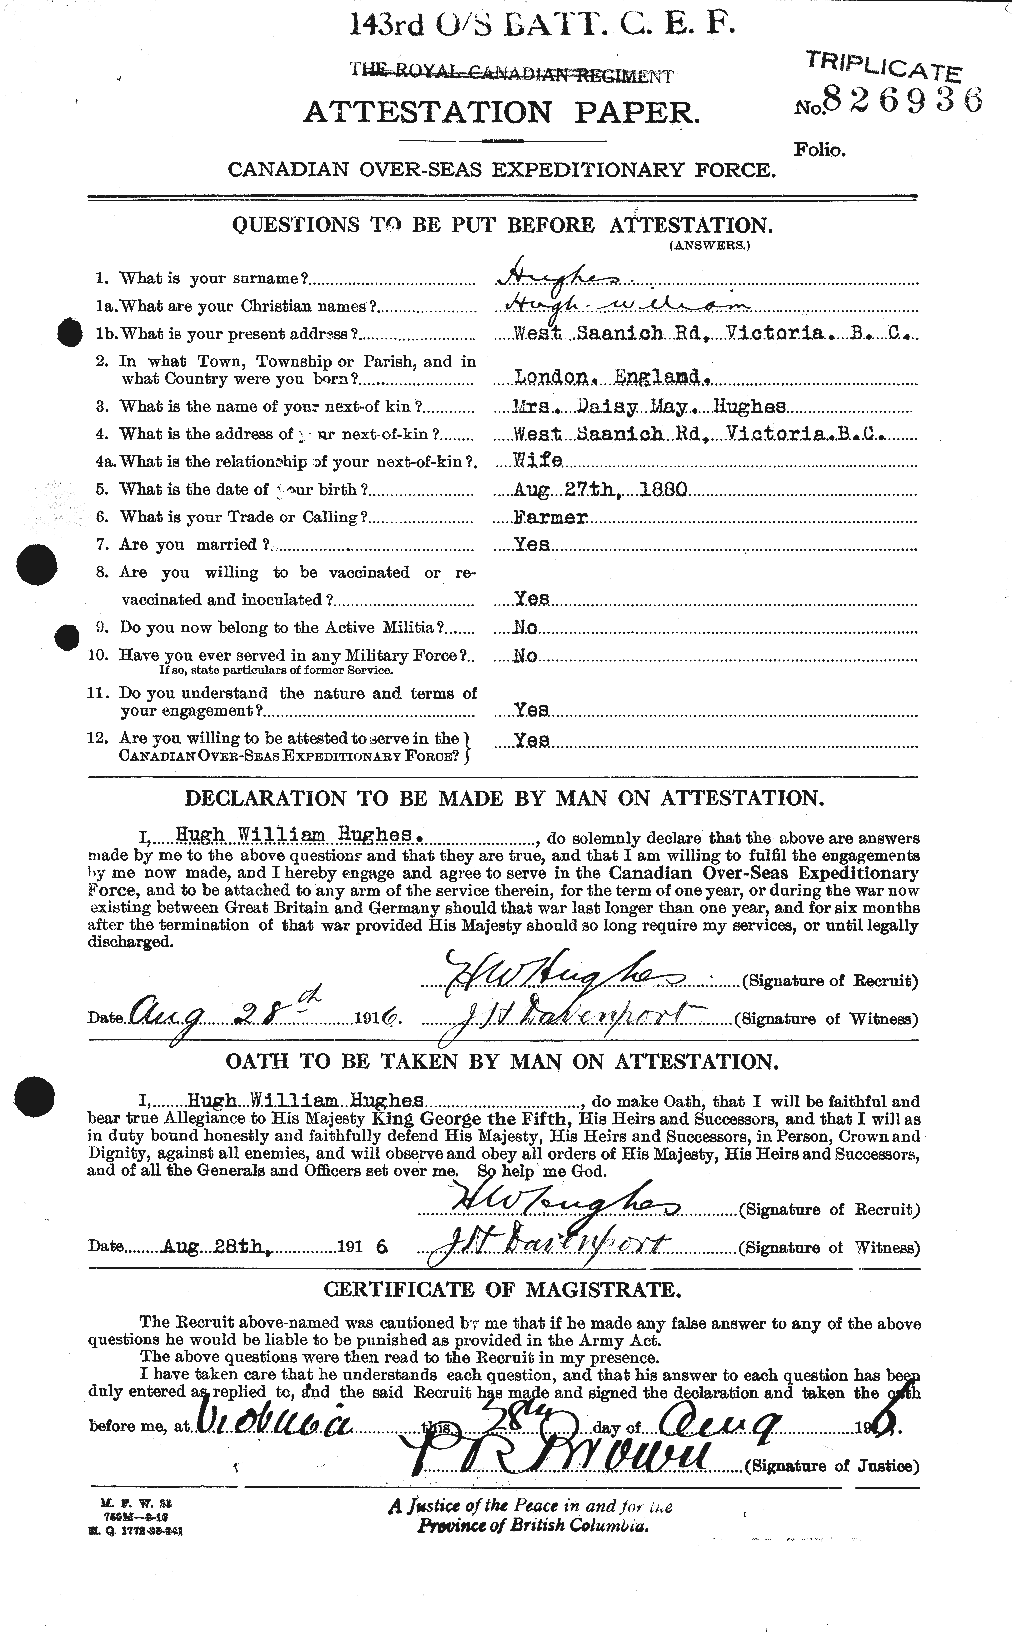 Personnel Records of the First World War - CEF 403931a